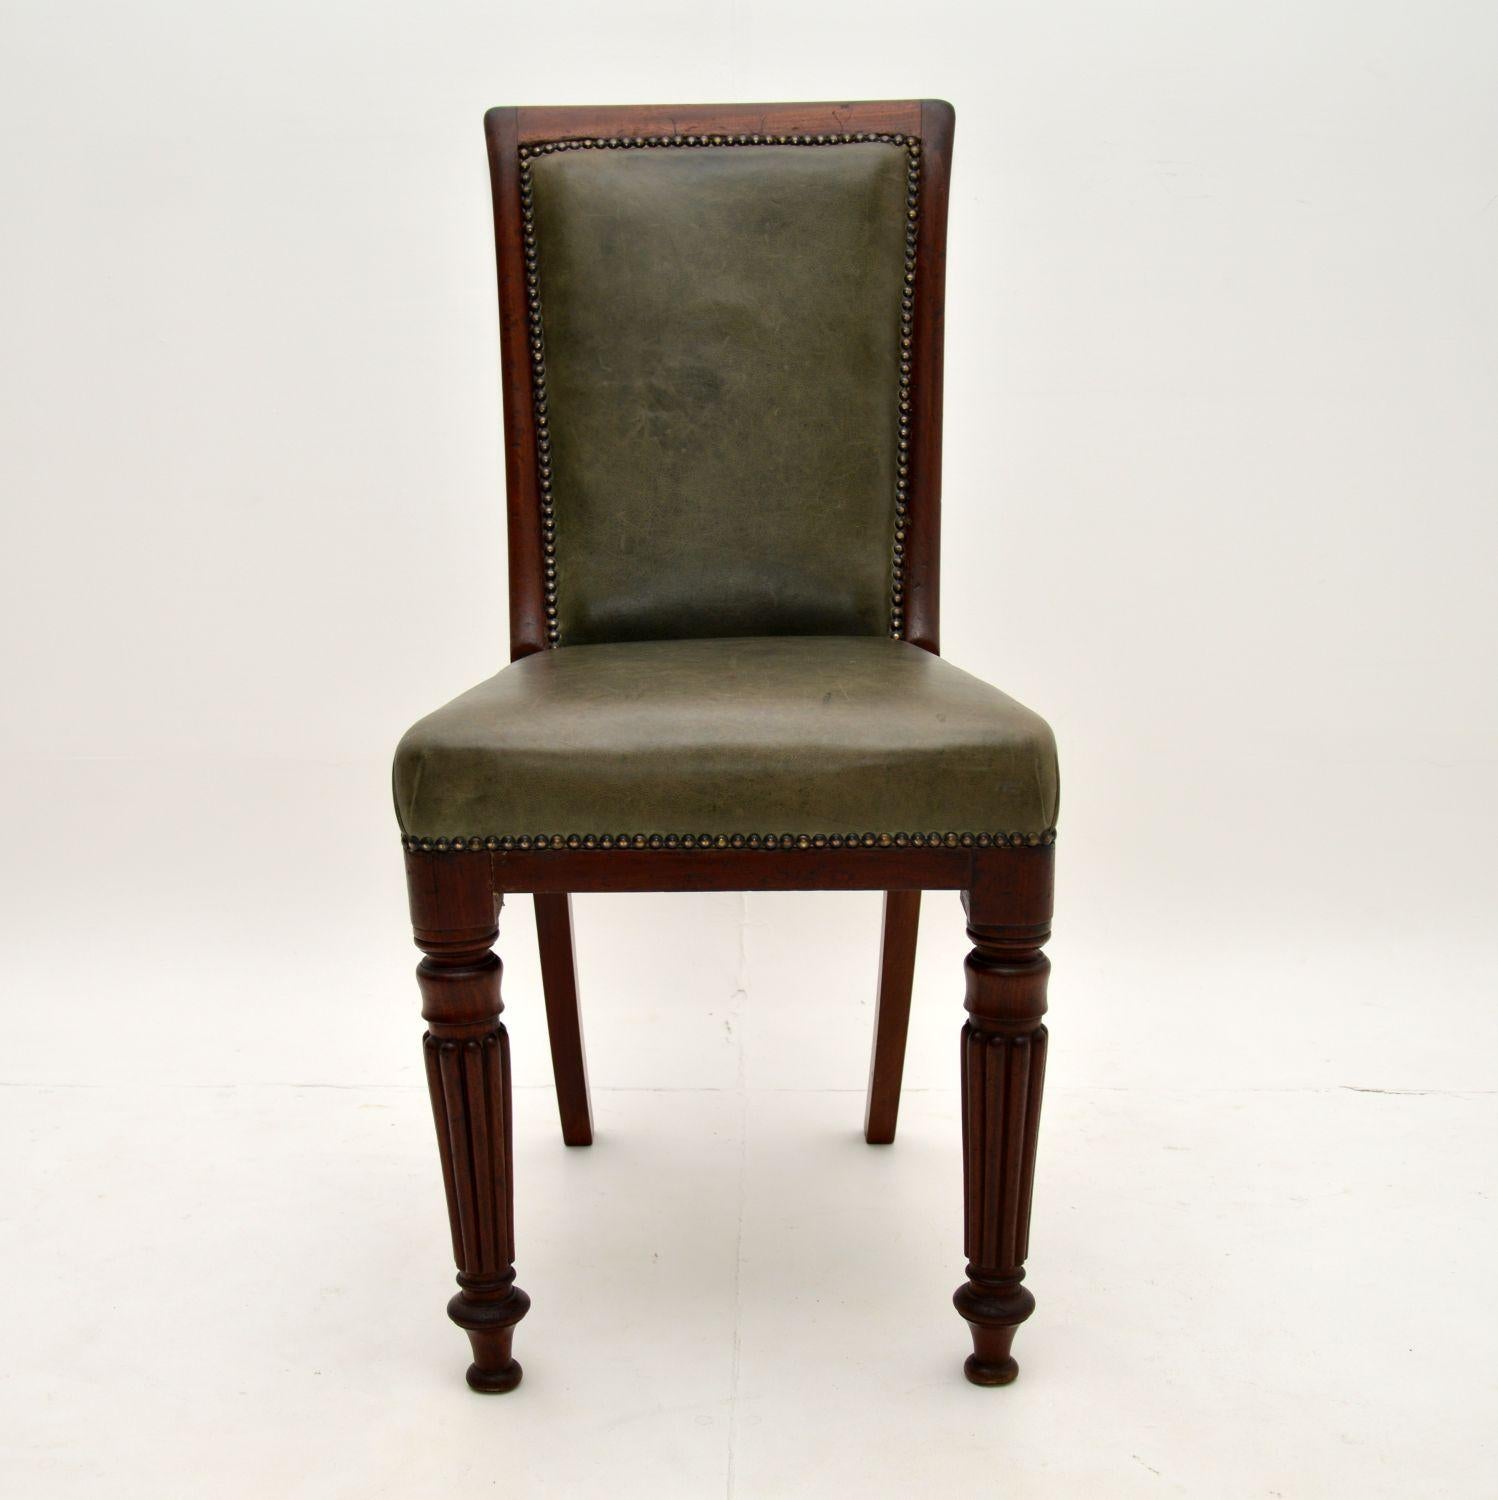 English Antique Victorian Solid Wood & Leather Desk / Side Chair